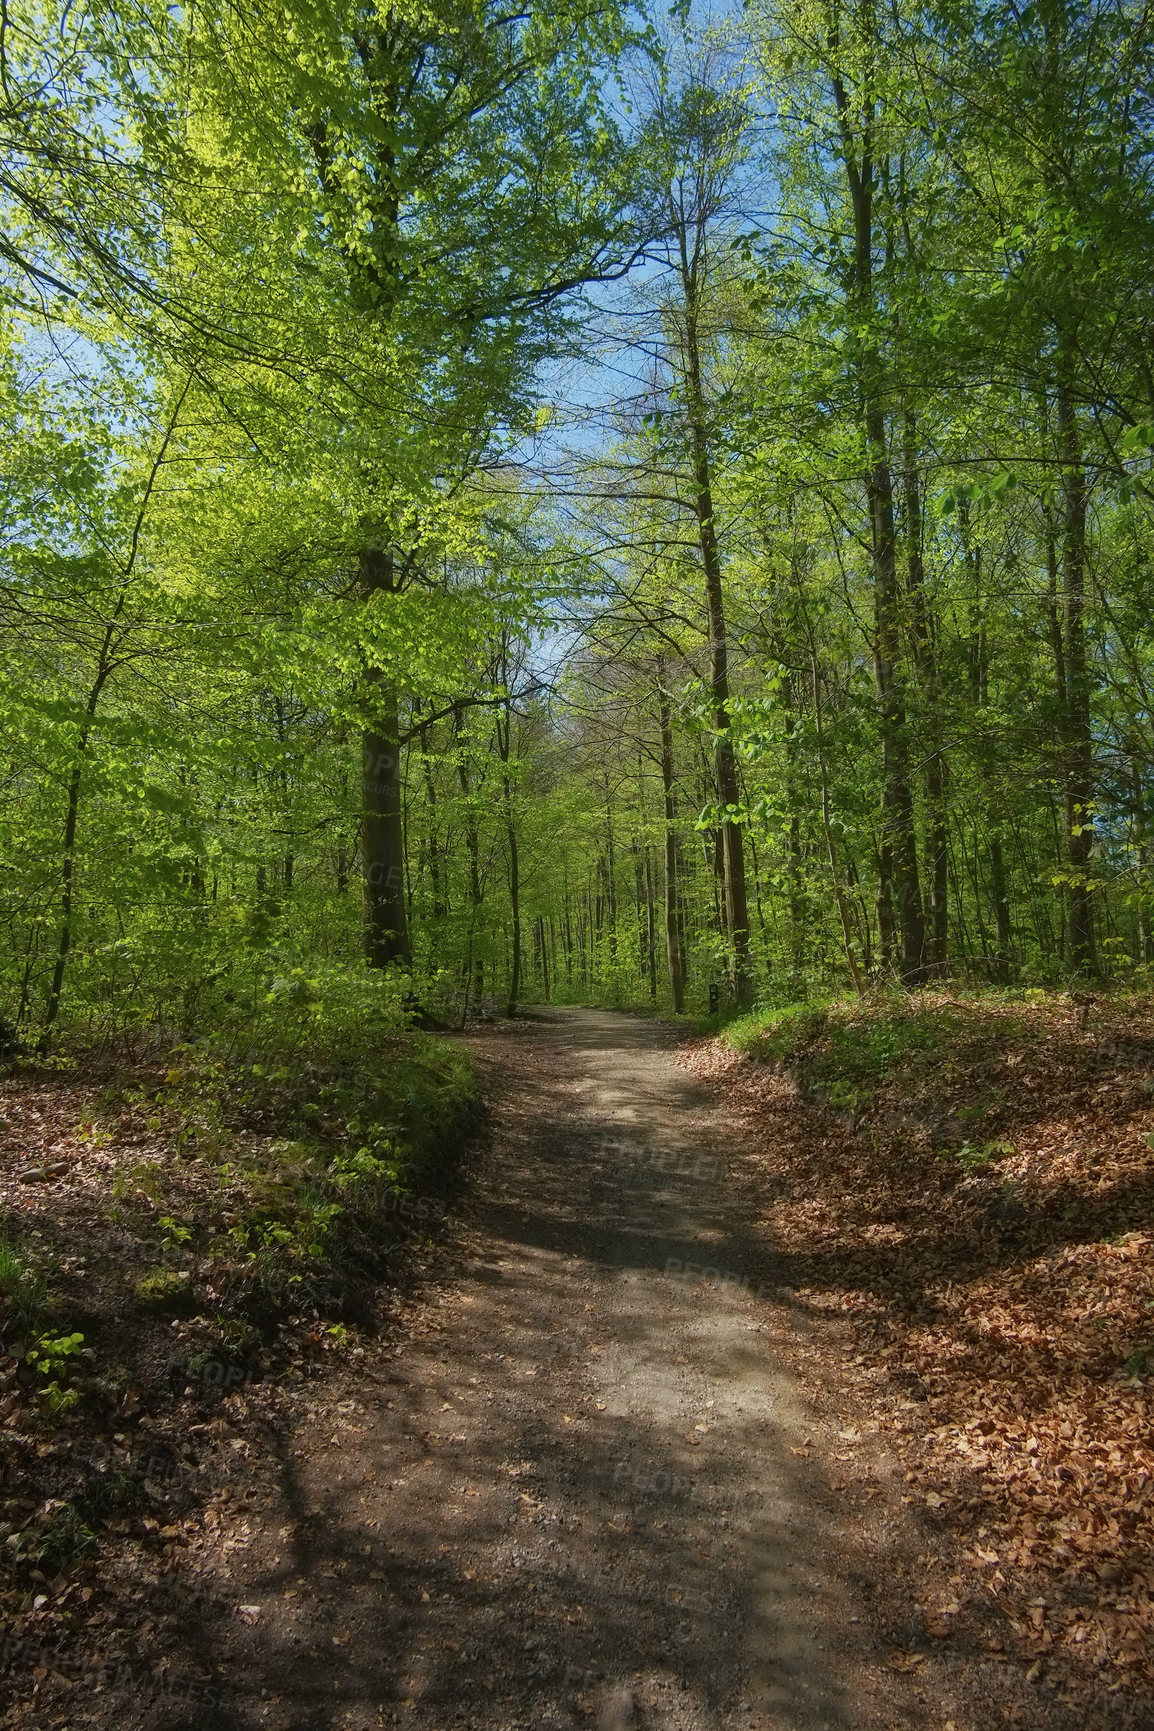 Buy stock photo A photo of forest beauty in pringtime